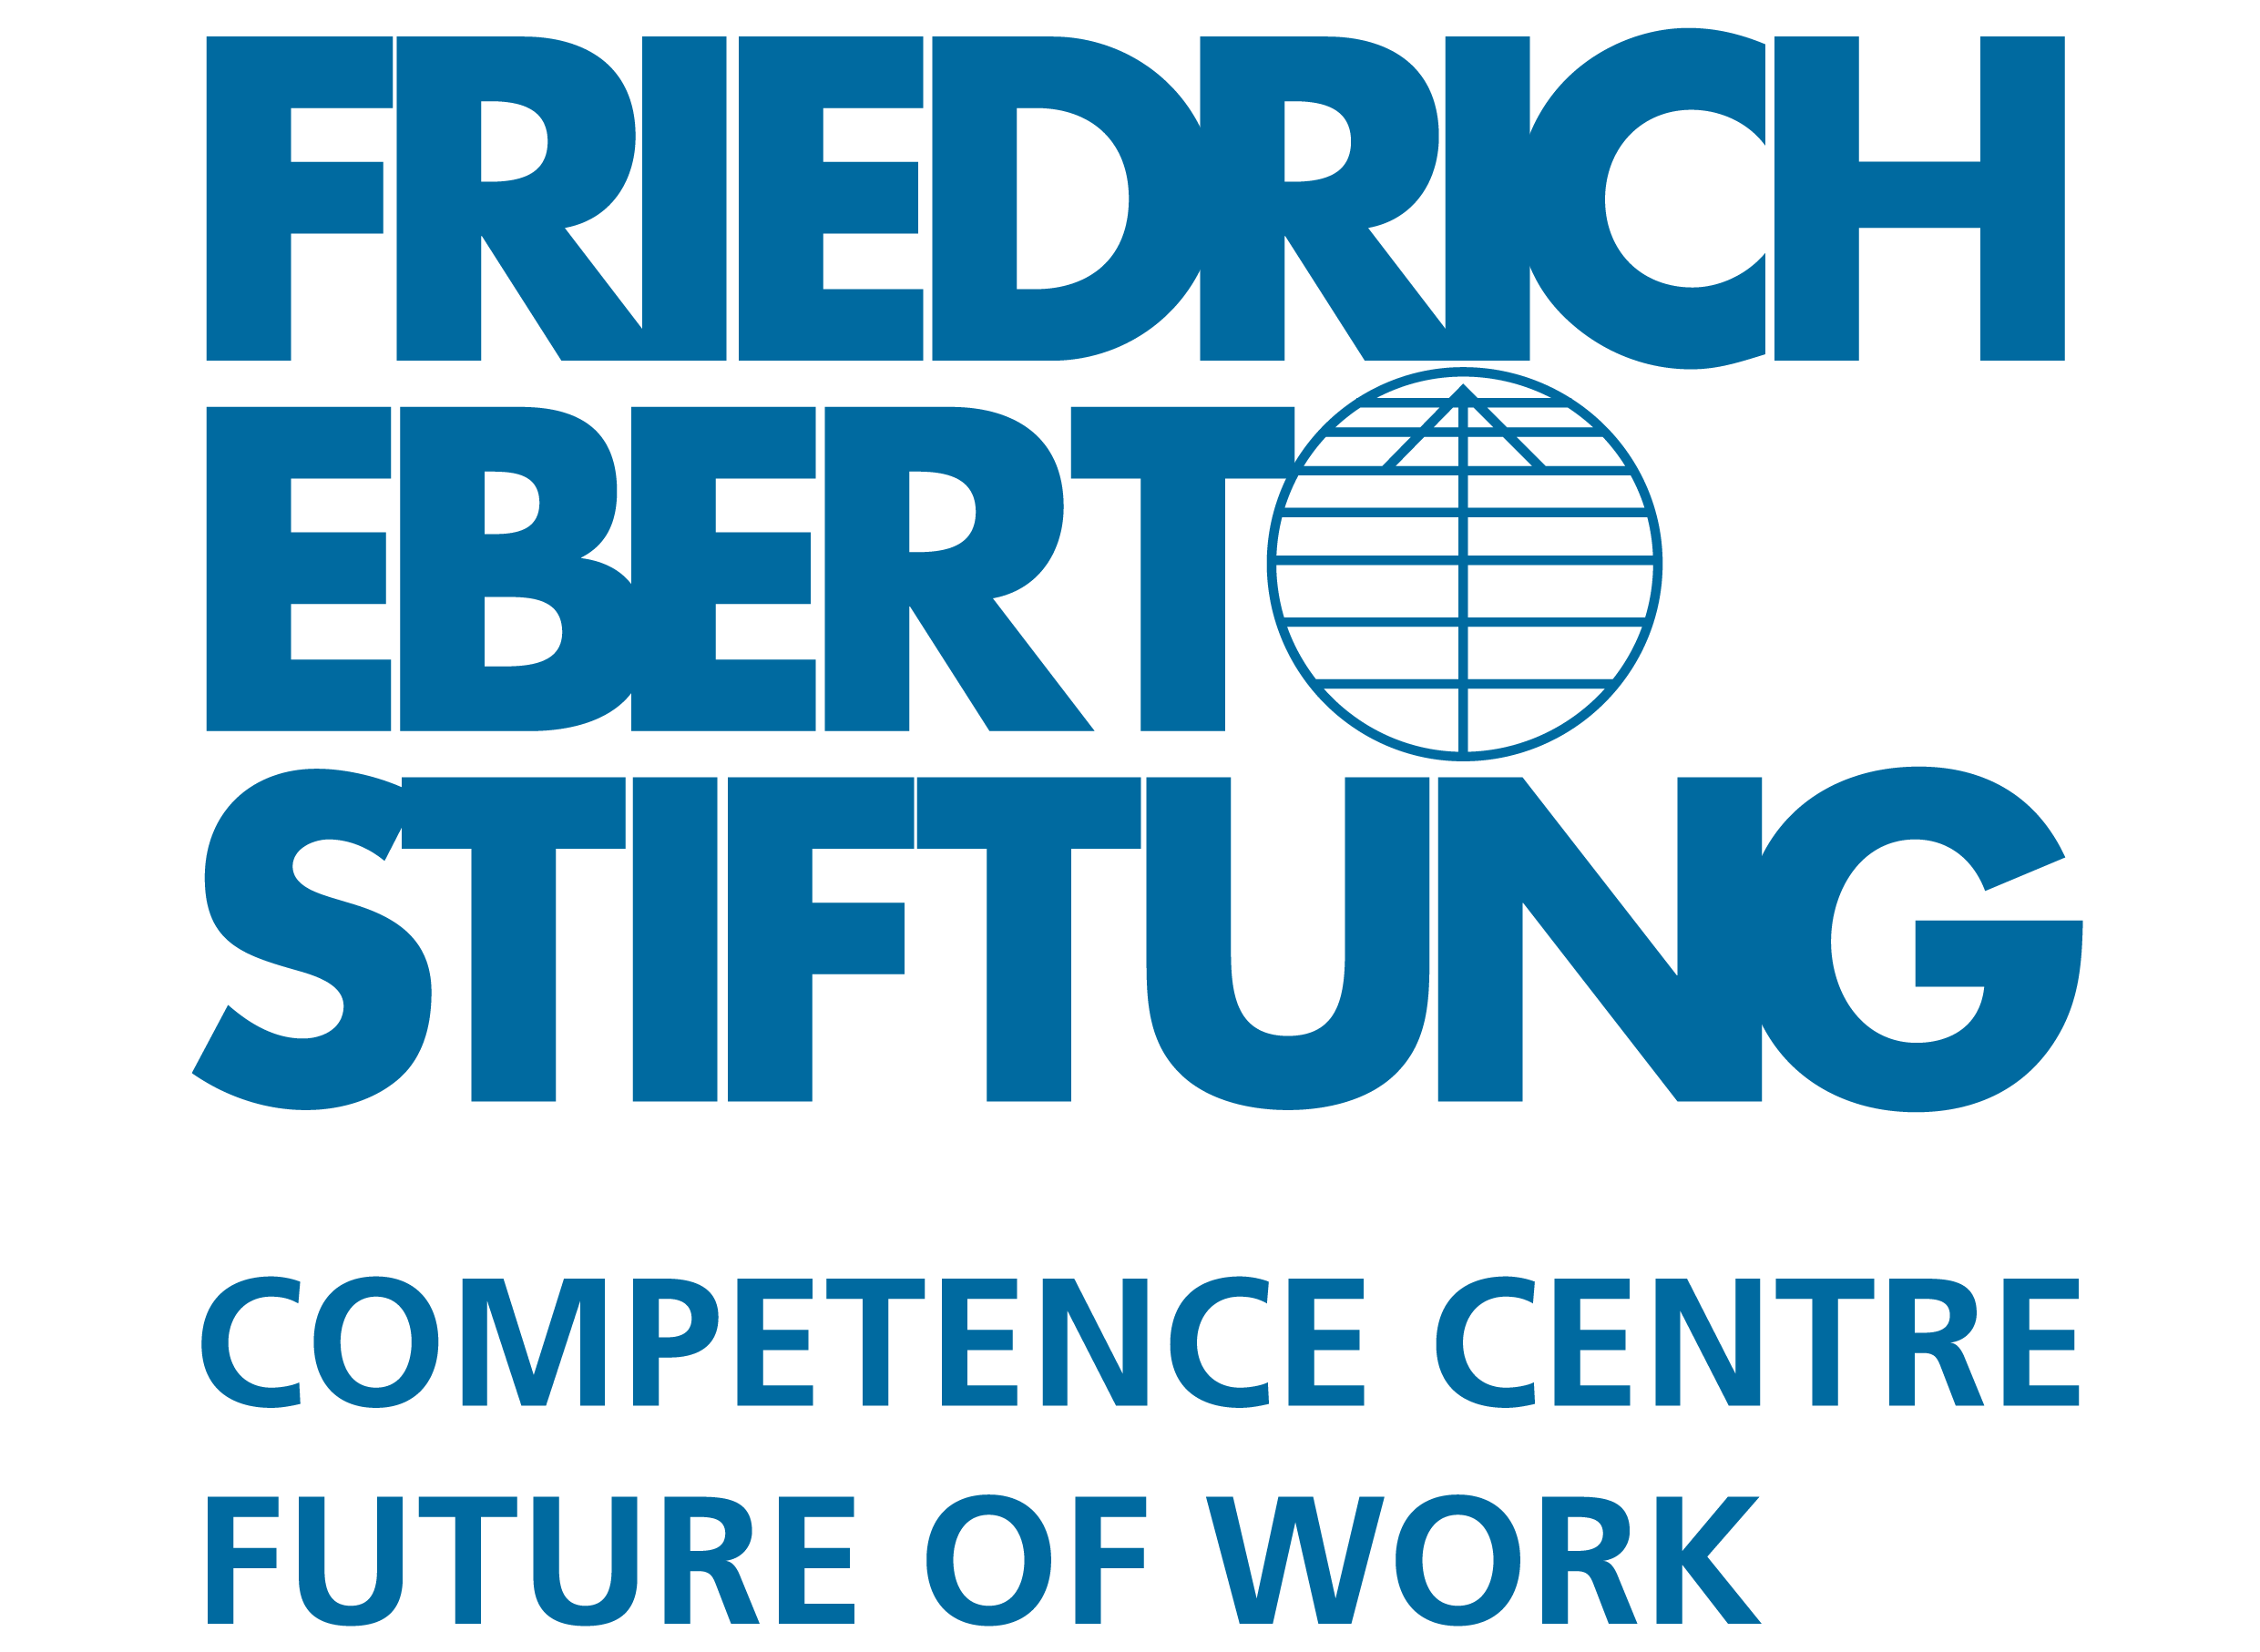 Friedrich-Ebert-Stiftung – Competence Centre of the Future of Work